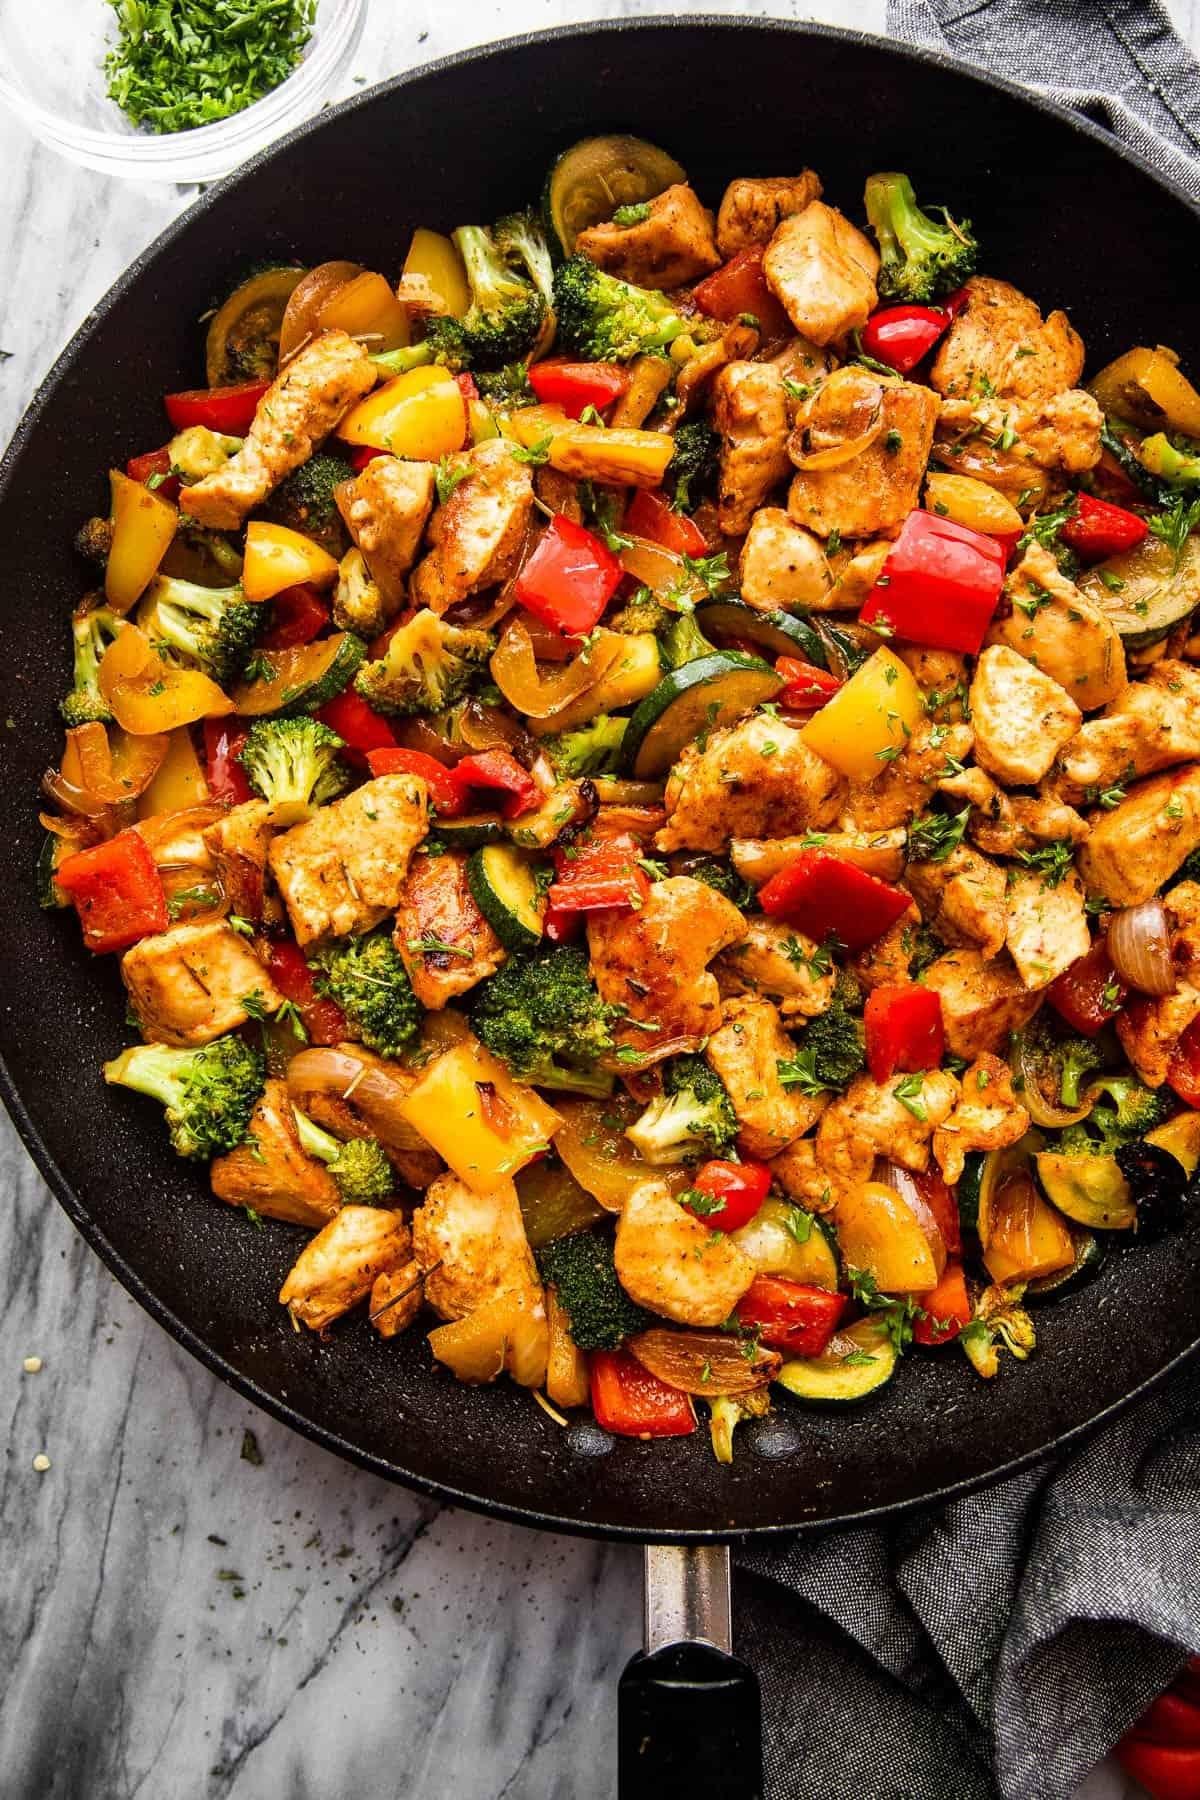 Spice Up Your Weeknight Dinner with this Easy One-Pan Chicken and Veggie Skillet Recipe